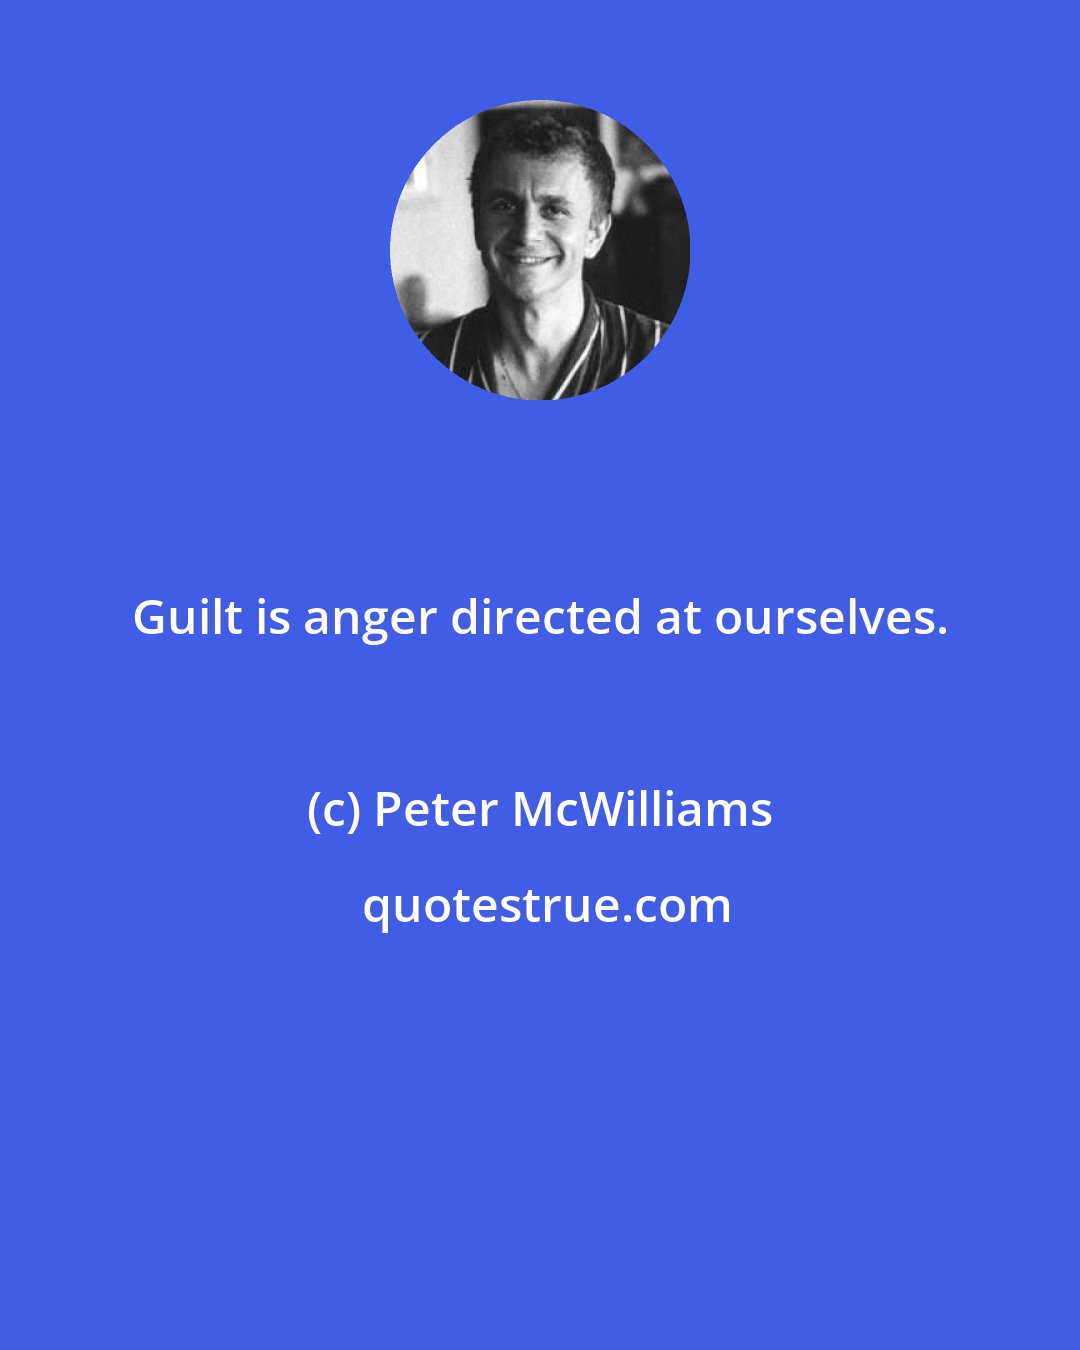 Peter McWilliams: Guilt is anger directed at ourselves.